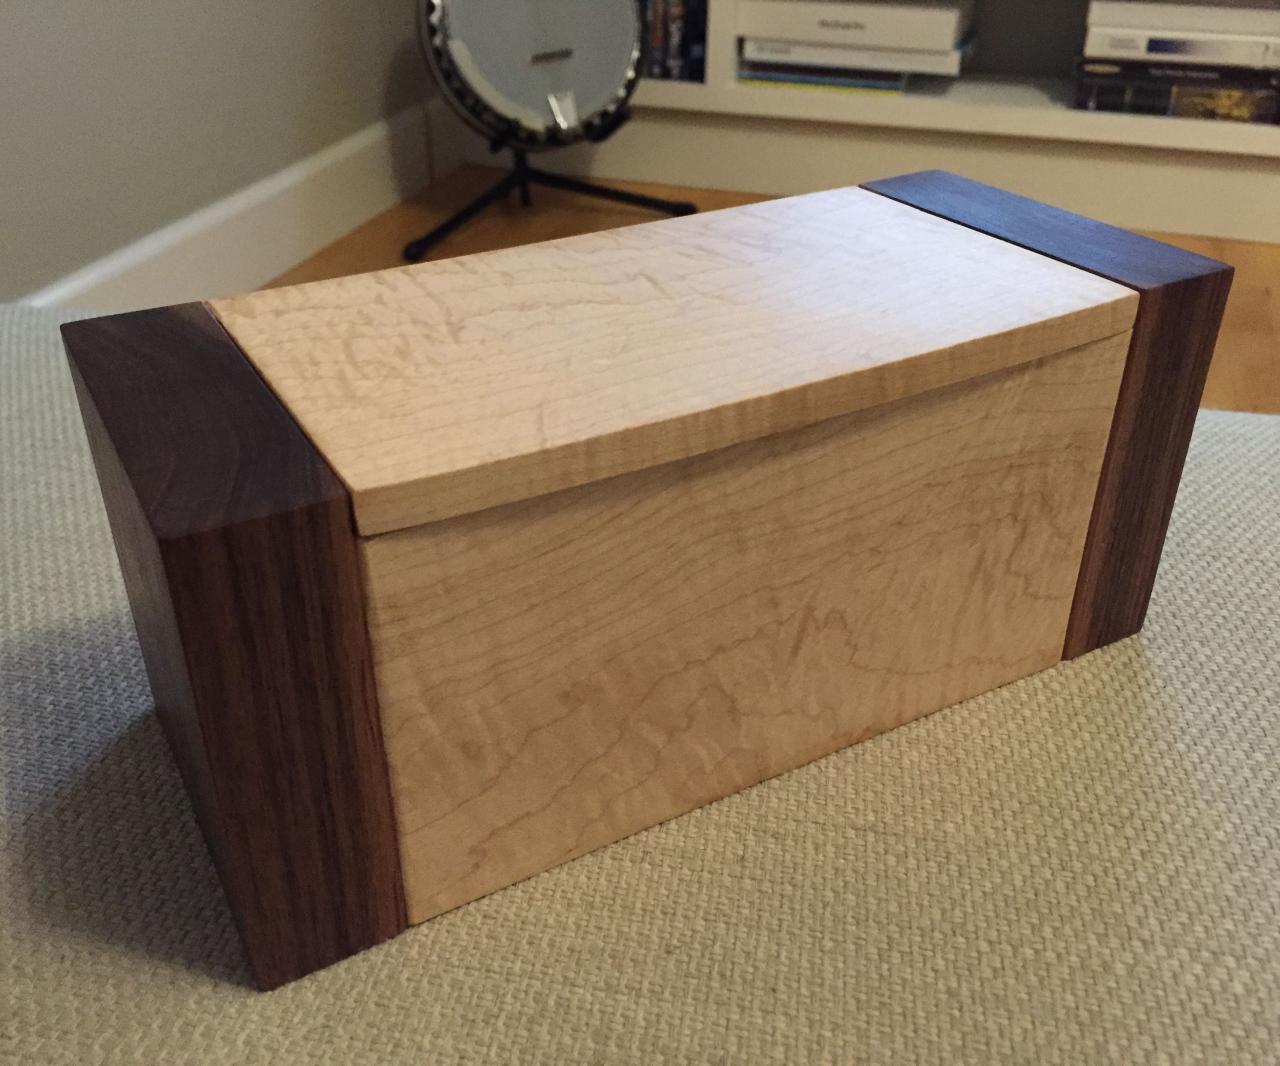 Secret Compartment Box 9 Steps (with Pictures) Instructables